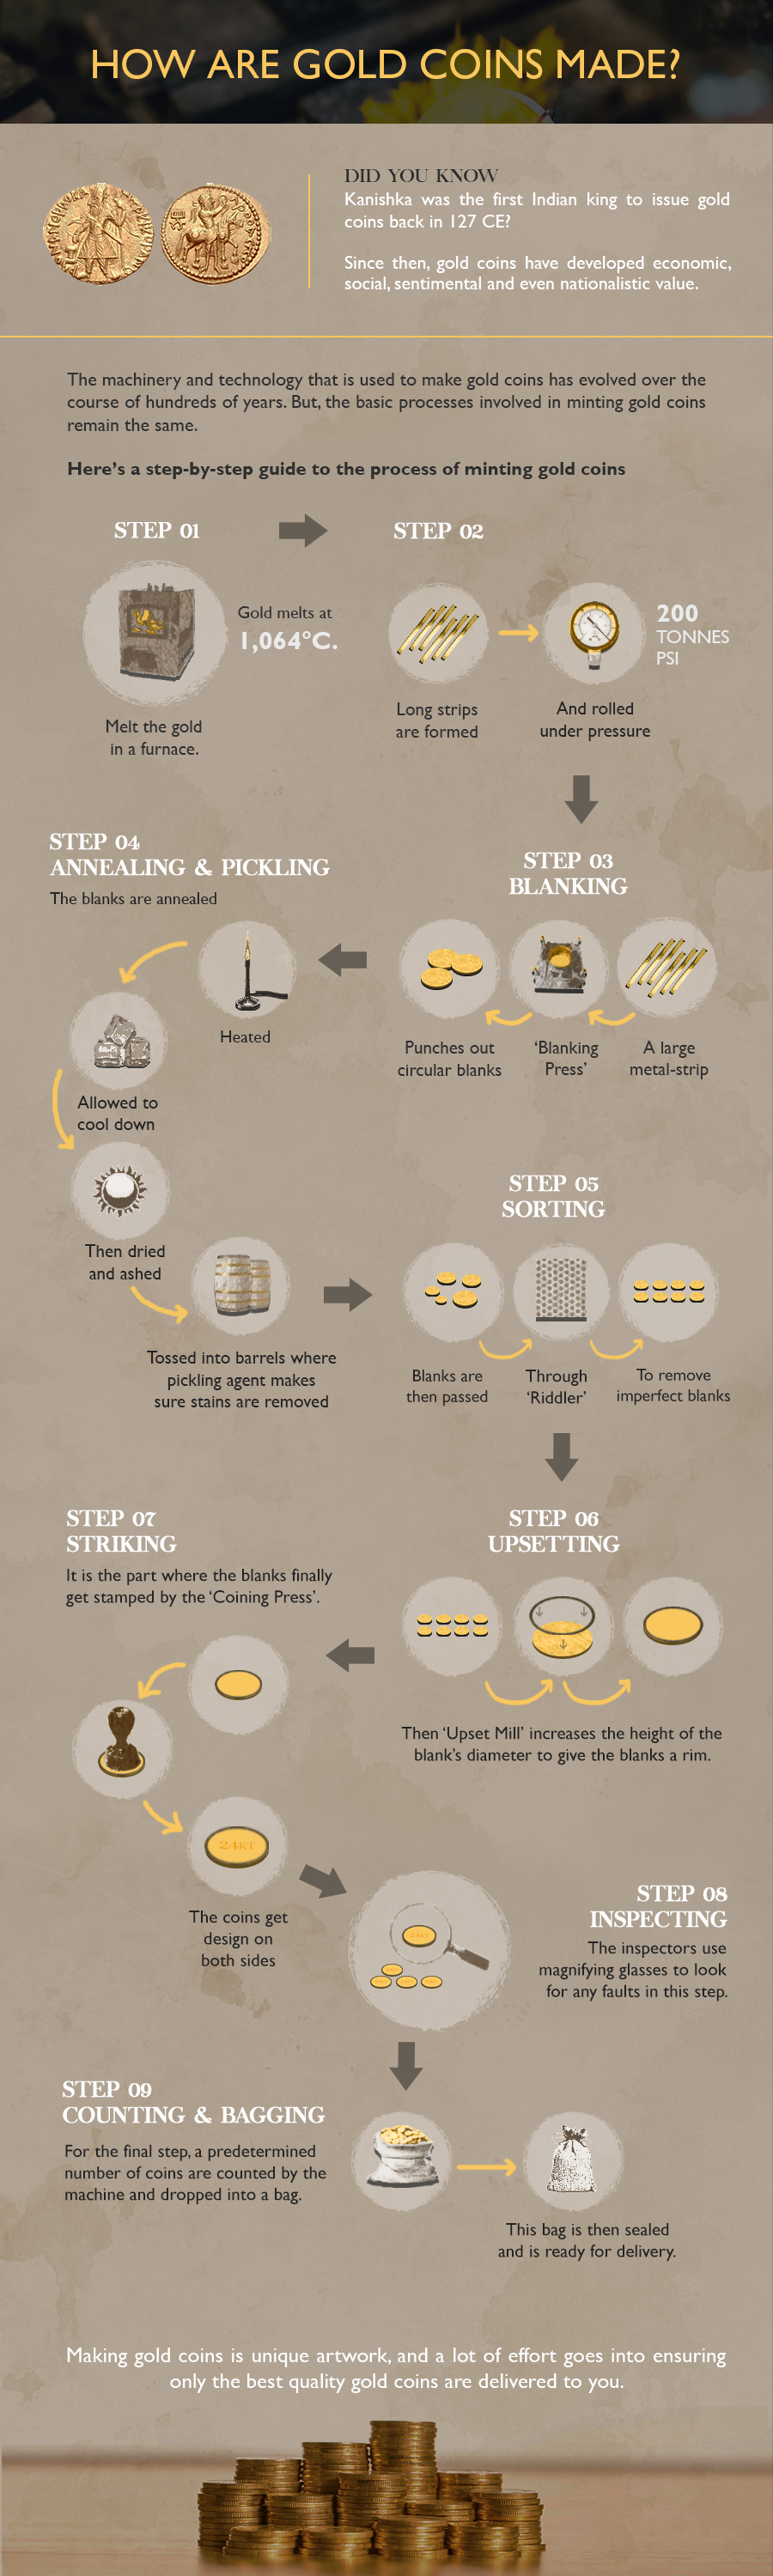 Machinery and technology to make gold coins has evolved over years, but the basic process to mint gold coins remains the same. Take a quick look into various steps followed to develop quality gold coins.